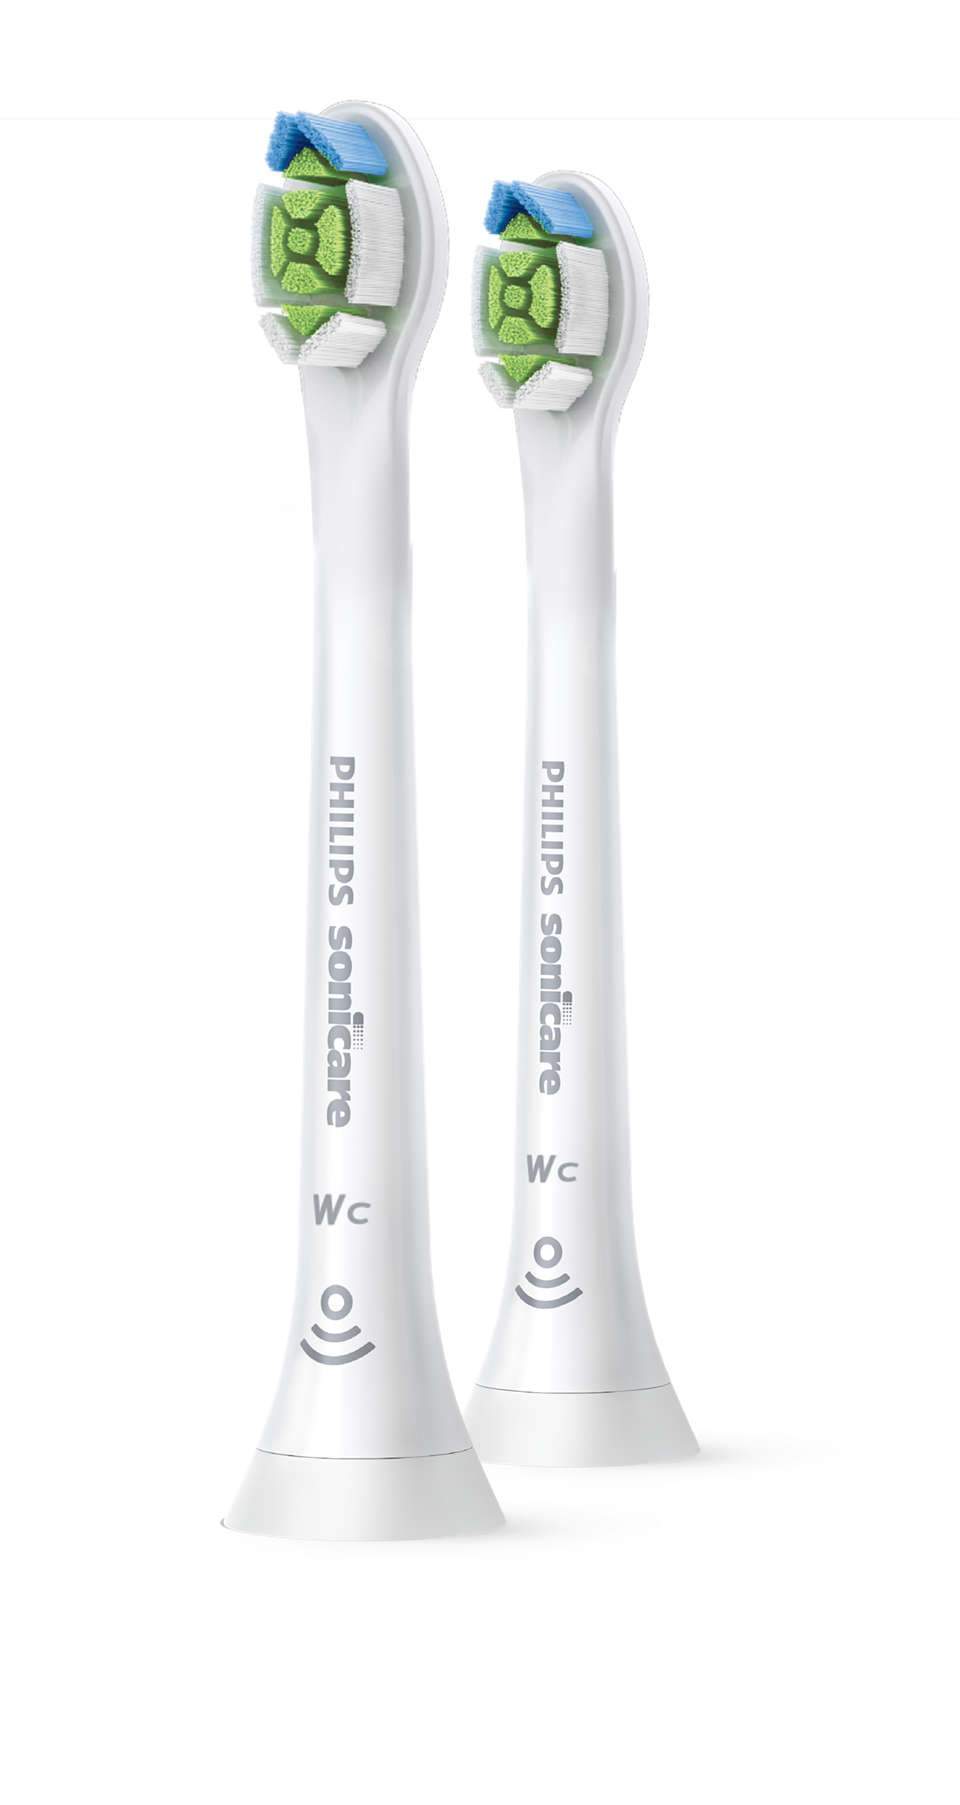 Philips Sonicare WC DimondClean compact brush heads, White 2 pack HX6072/67 - Get a Cut NZ